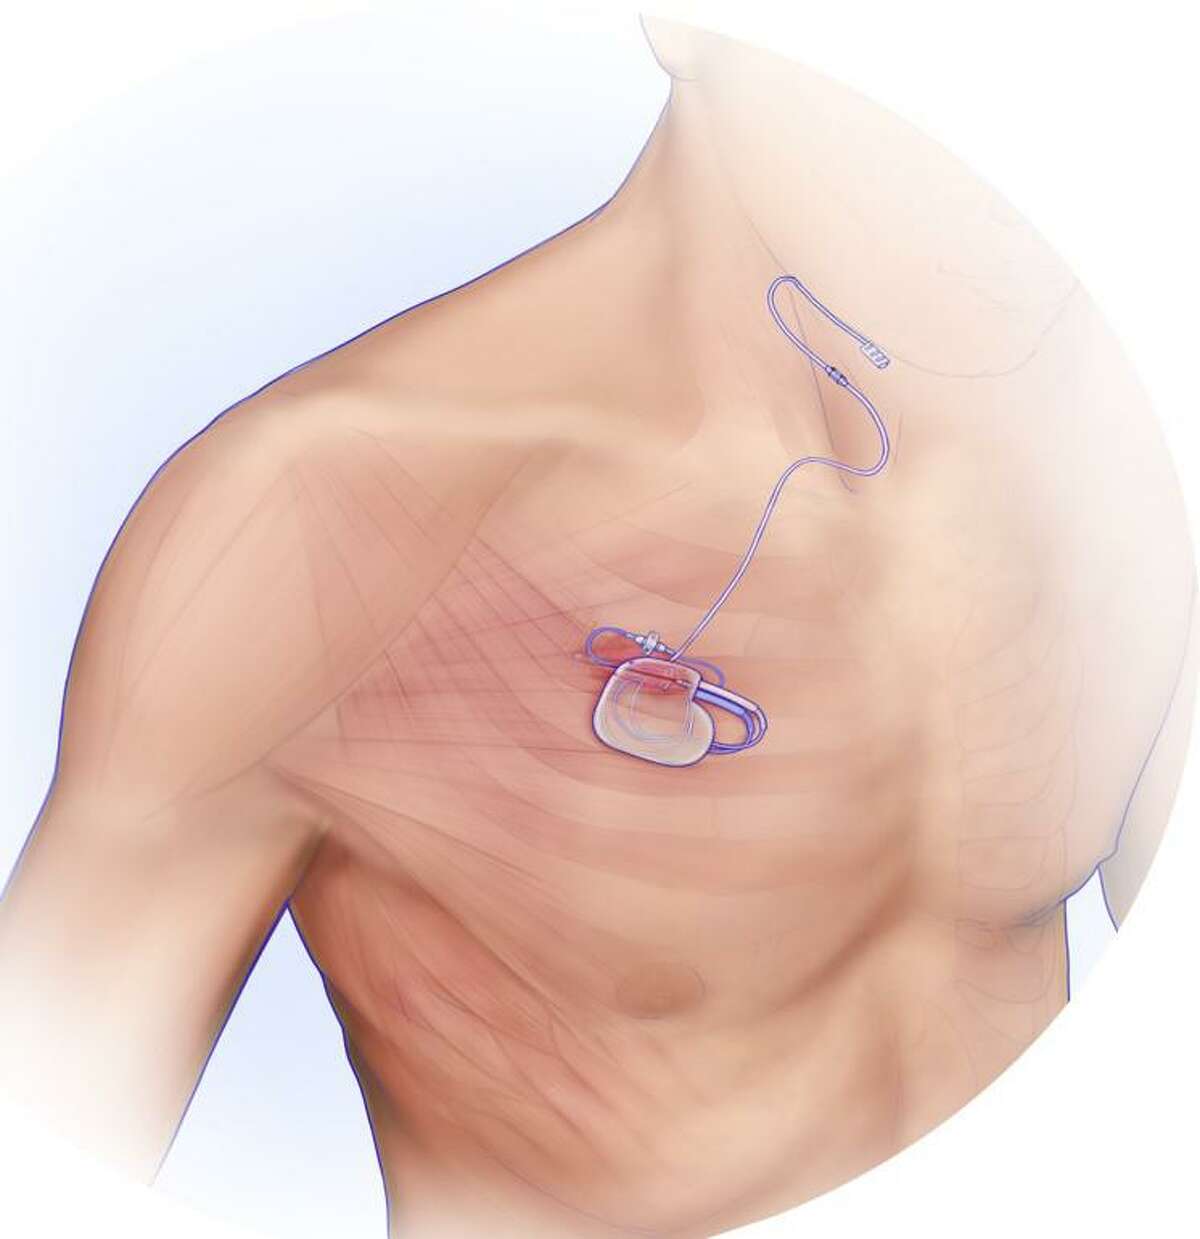 Illustration shows the location of the Inspire device and the leads that stimulate the hypoglossal nerve to prevent sleep apnea.